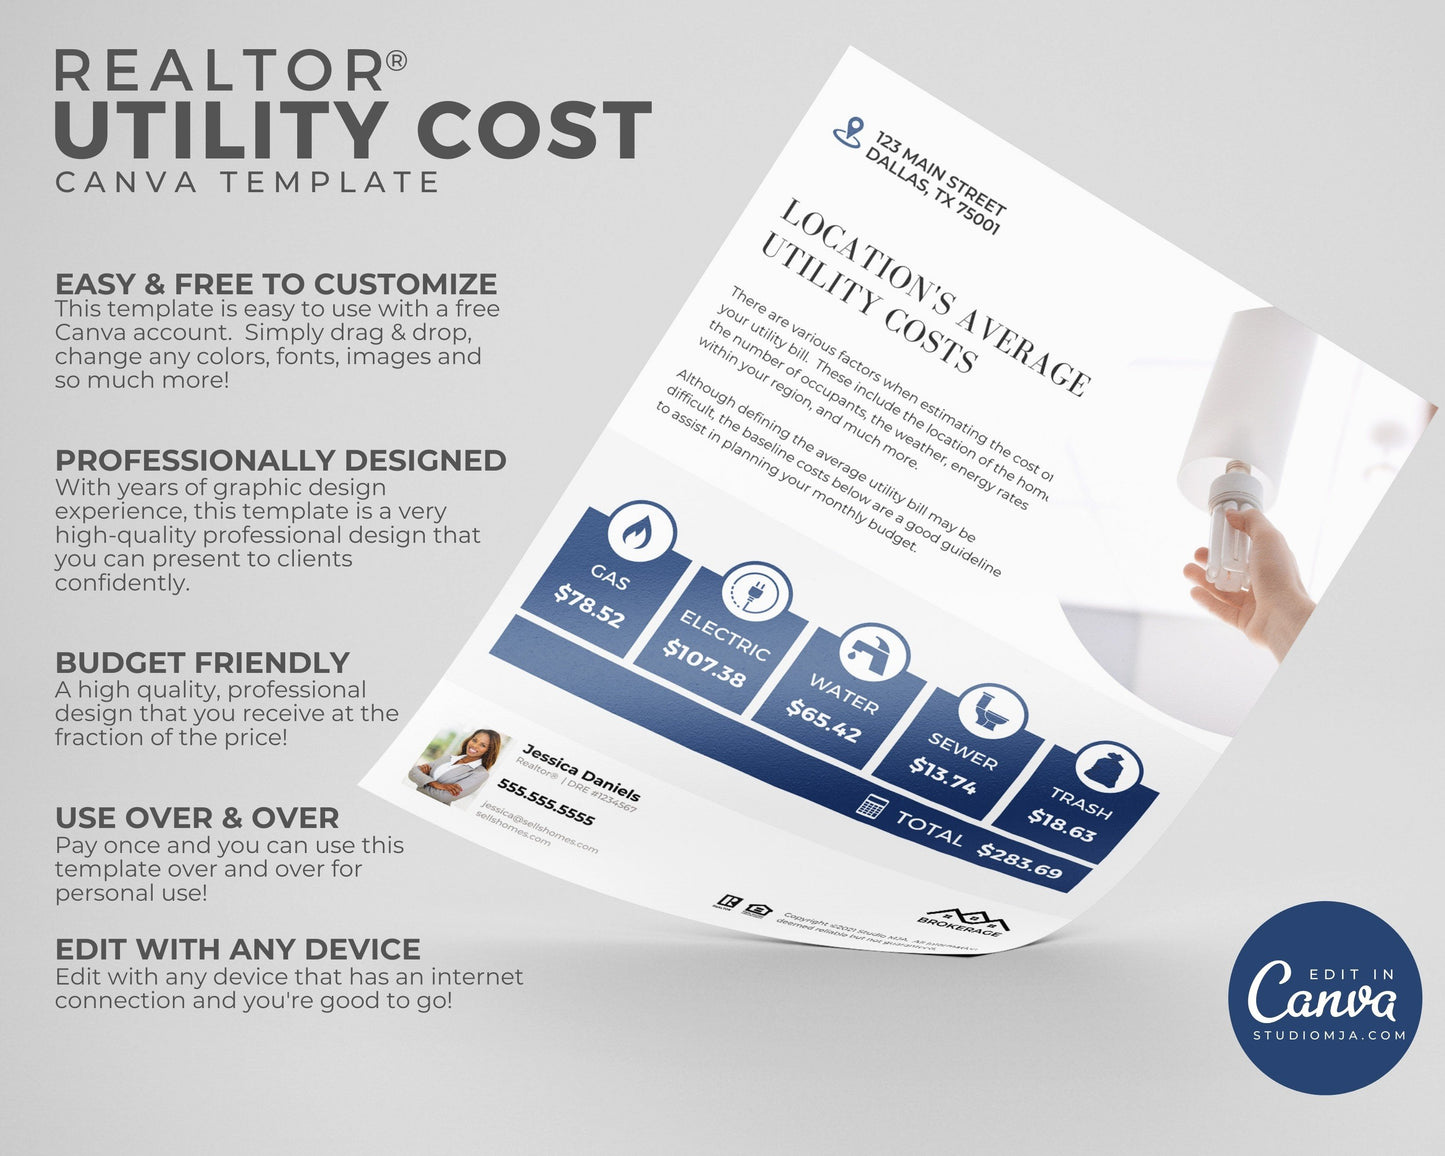 utility cost mockup template in white and blue, picture of lightbulb, with realtor logo and realtor photo